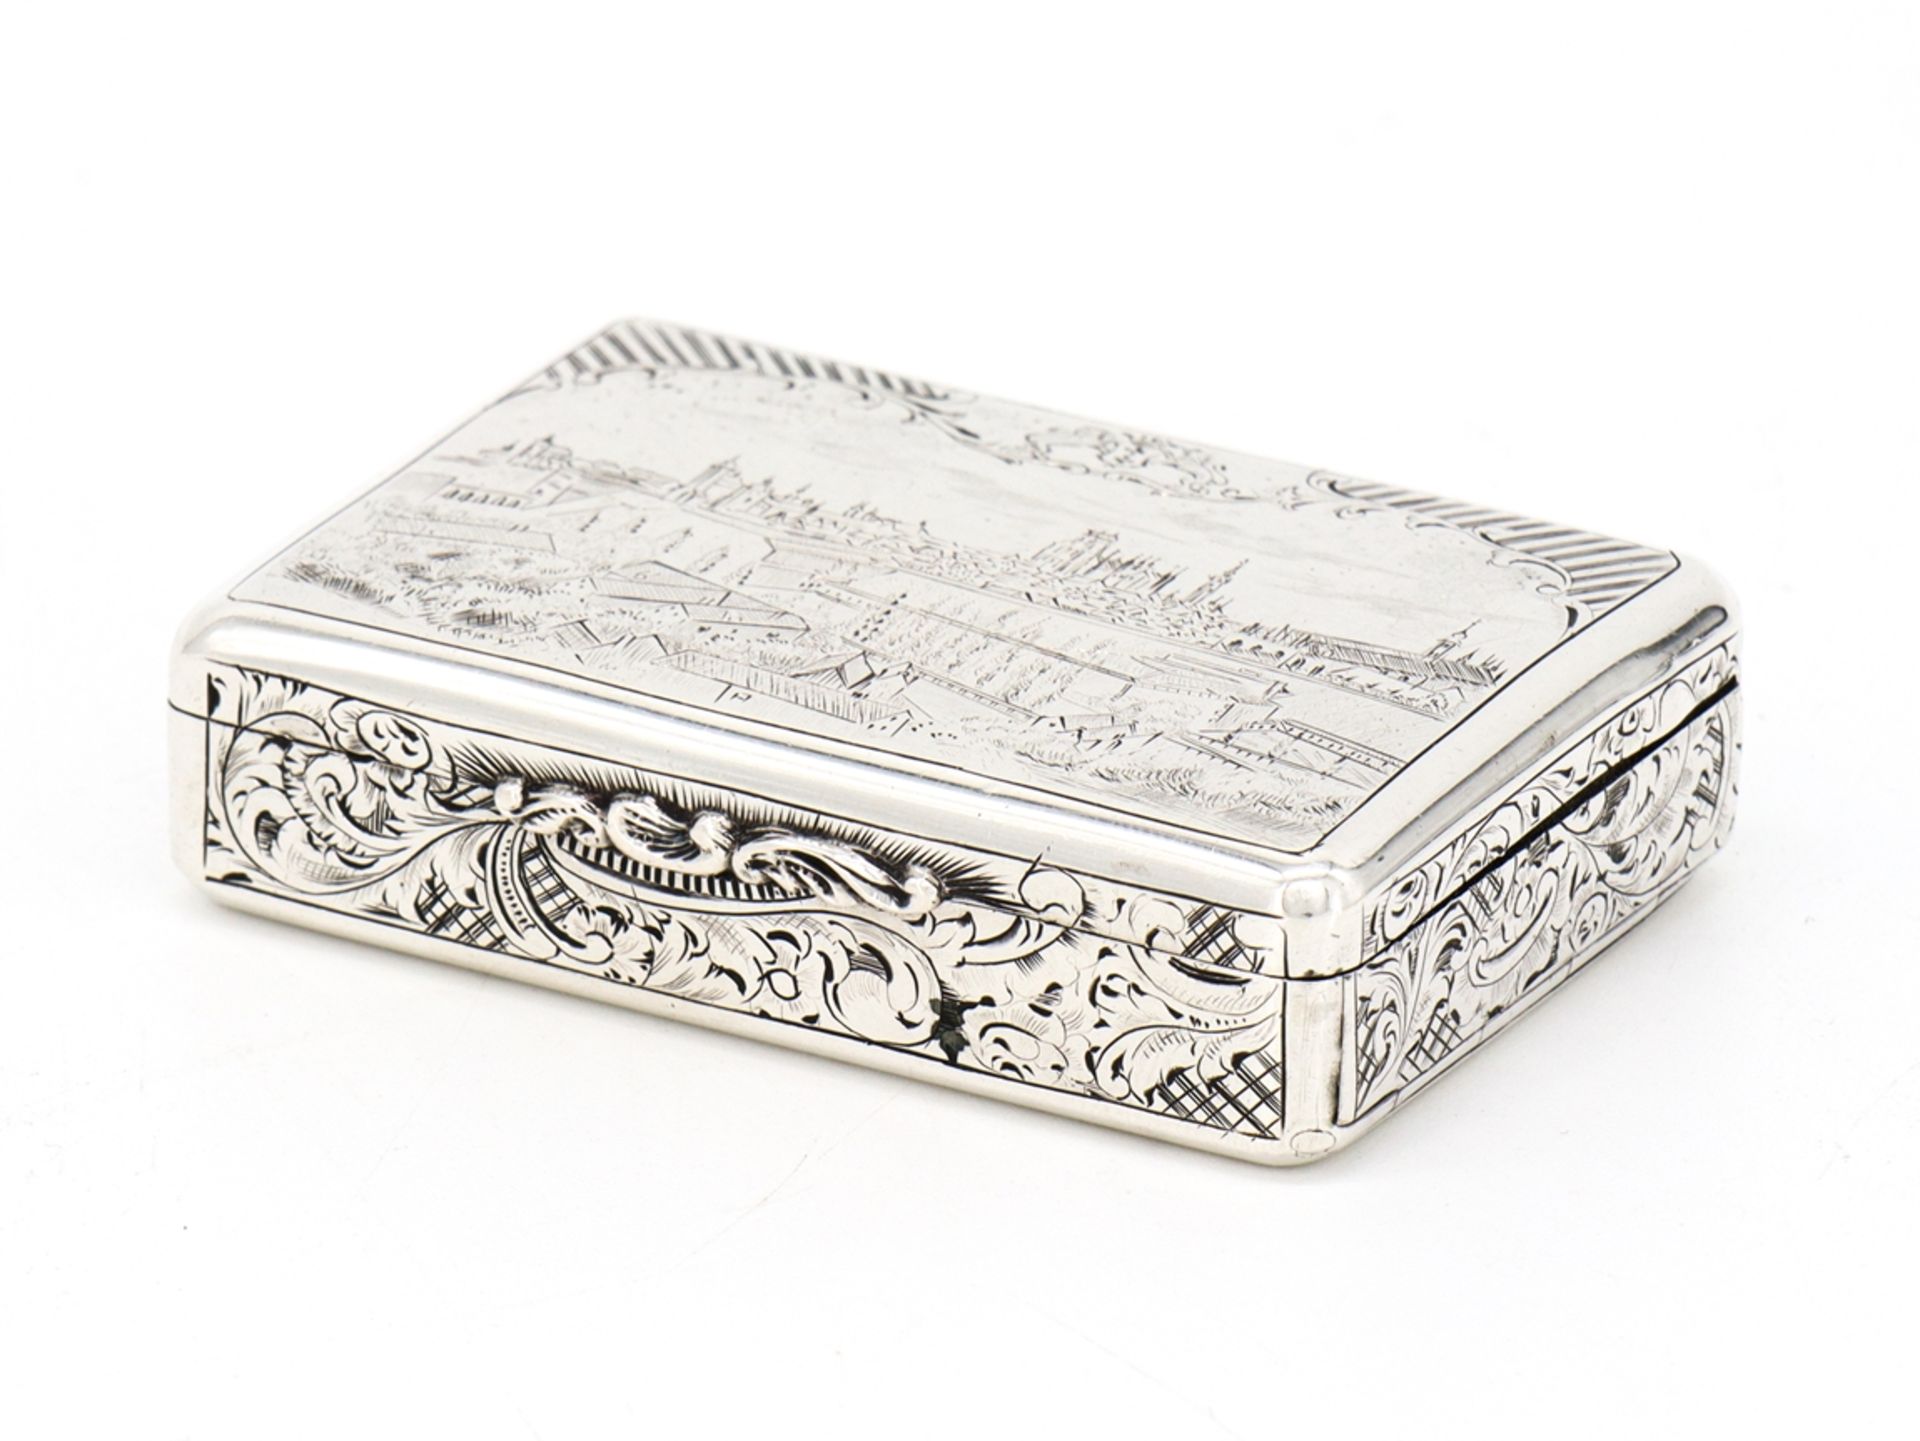 Match silver case with finely chased city view, around 1850 - Image 2 of 9